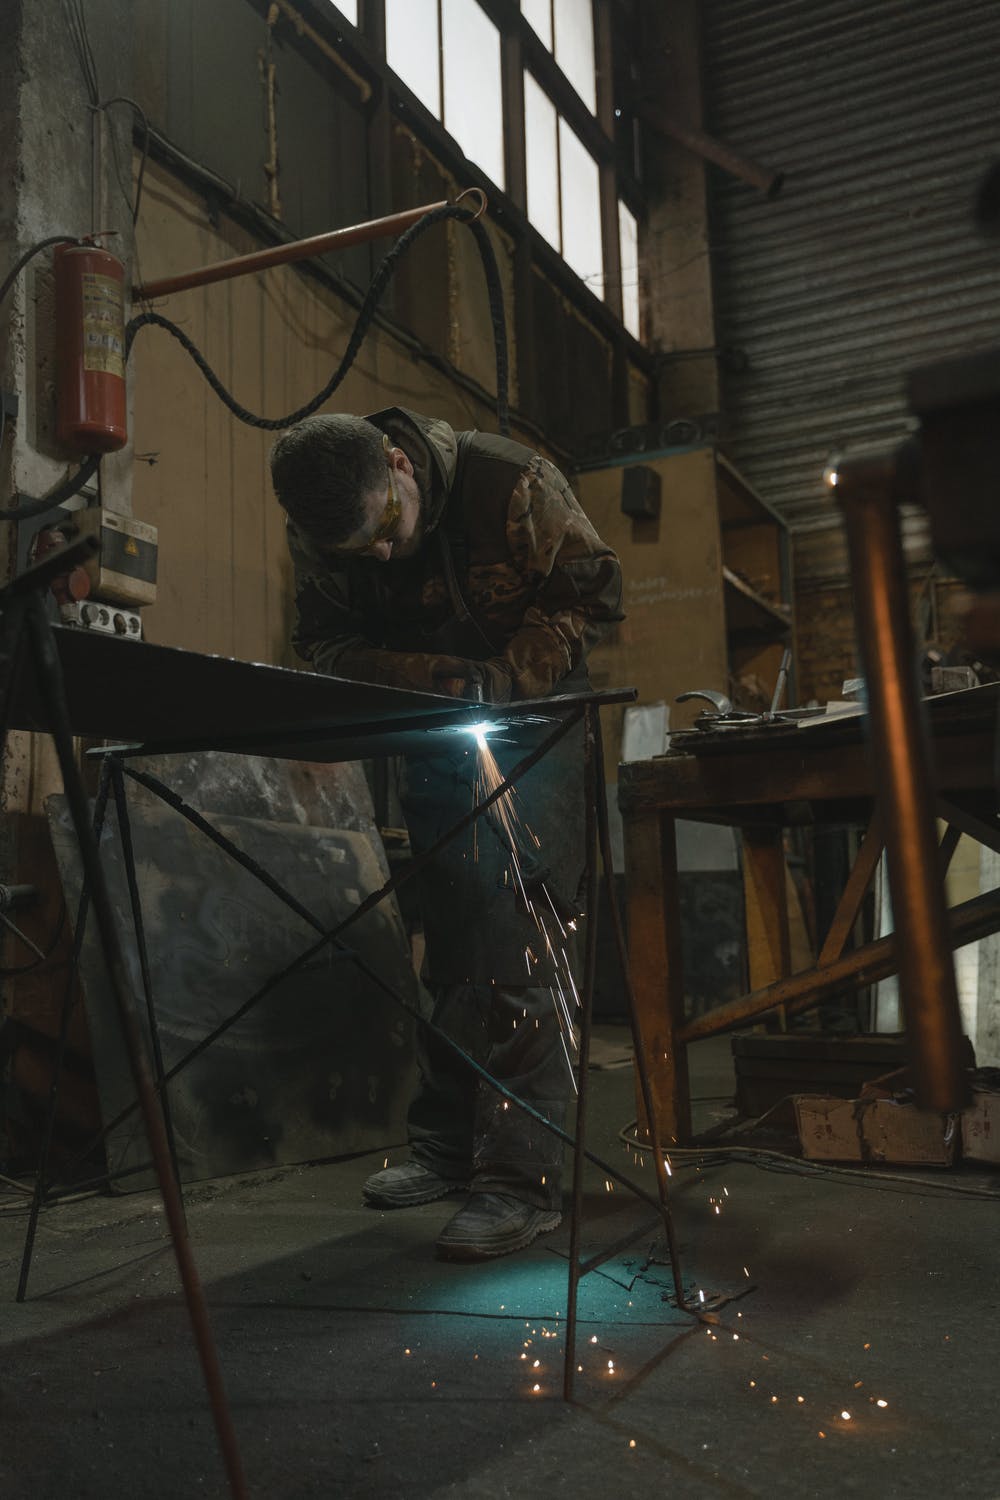 Get To Know Plasma Cutters Before Going Out To Buy One